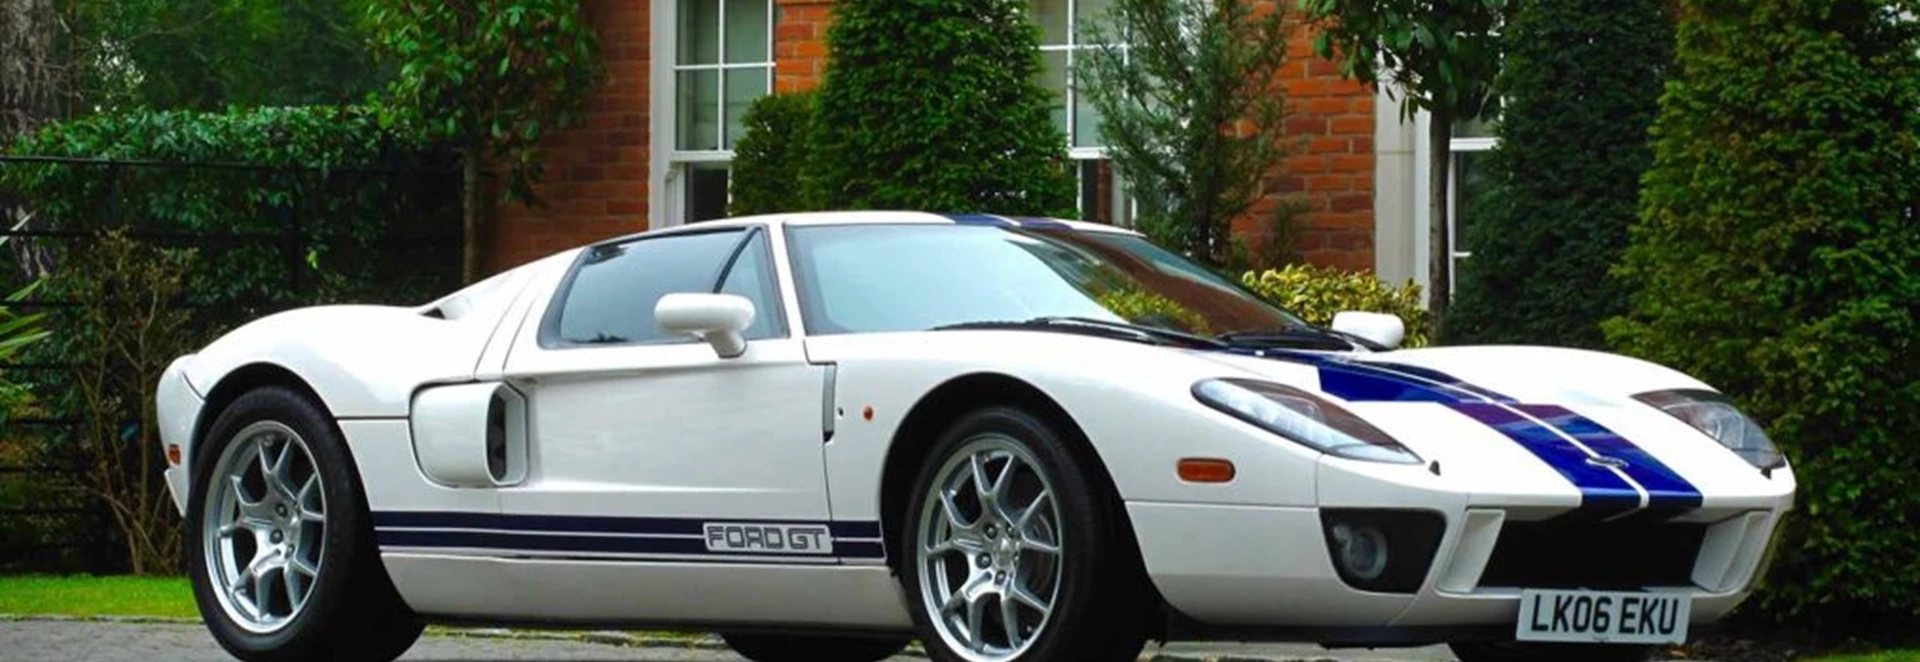 Jenson Button’s Ford GT is available to buy